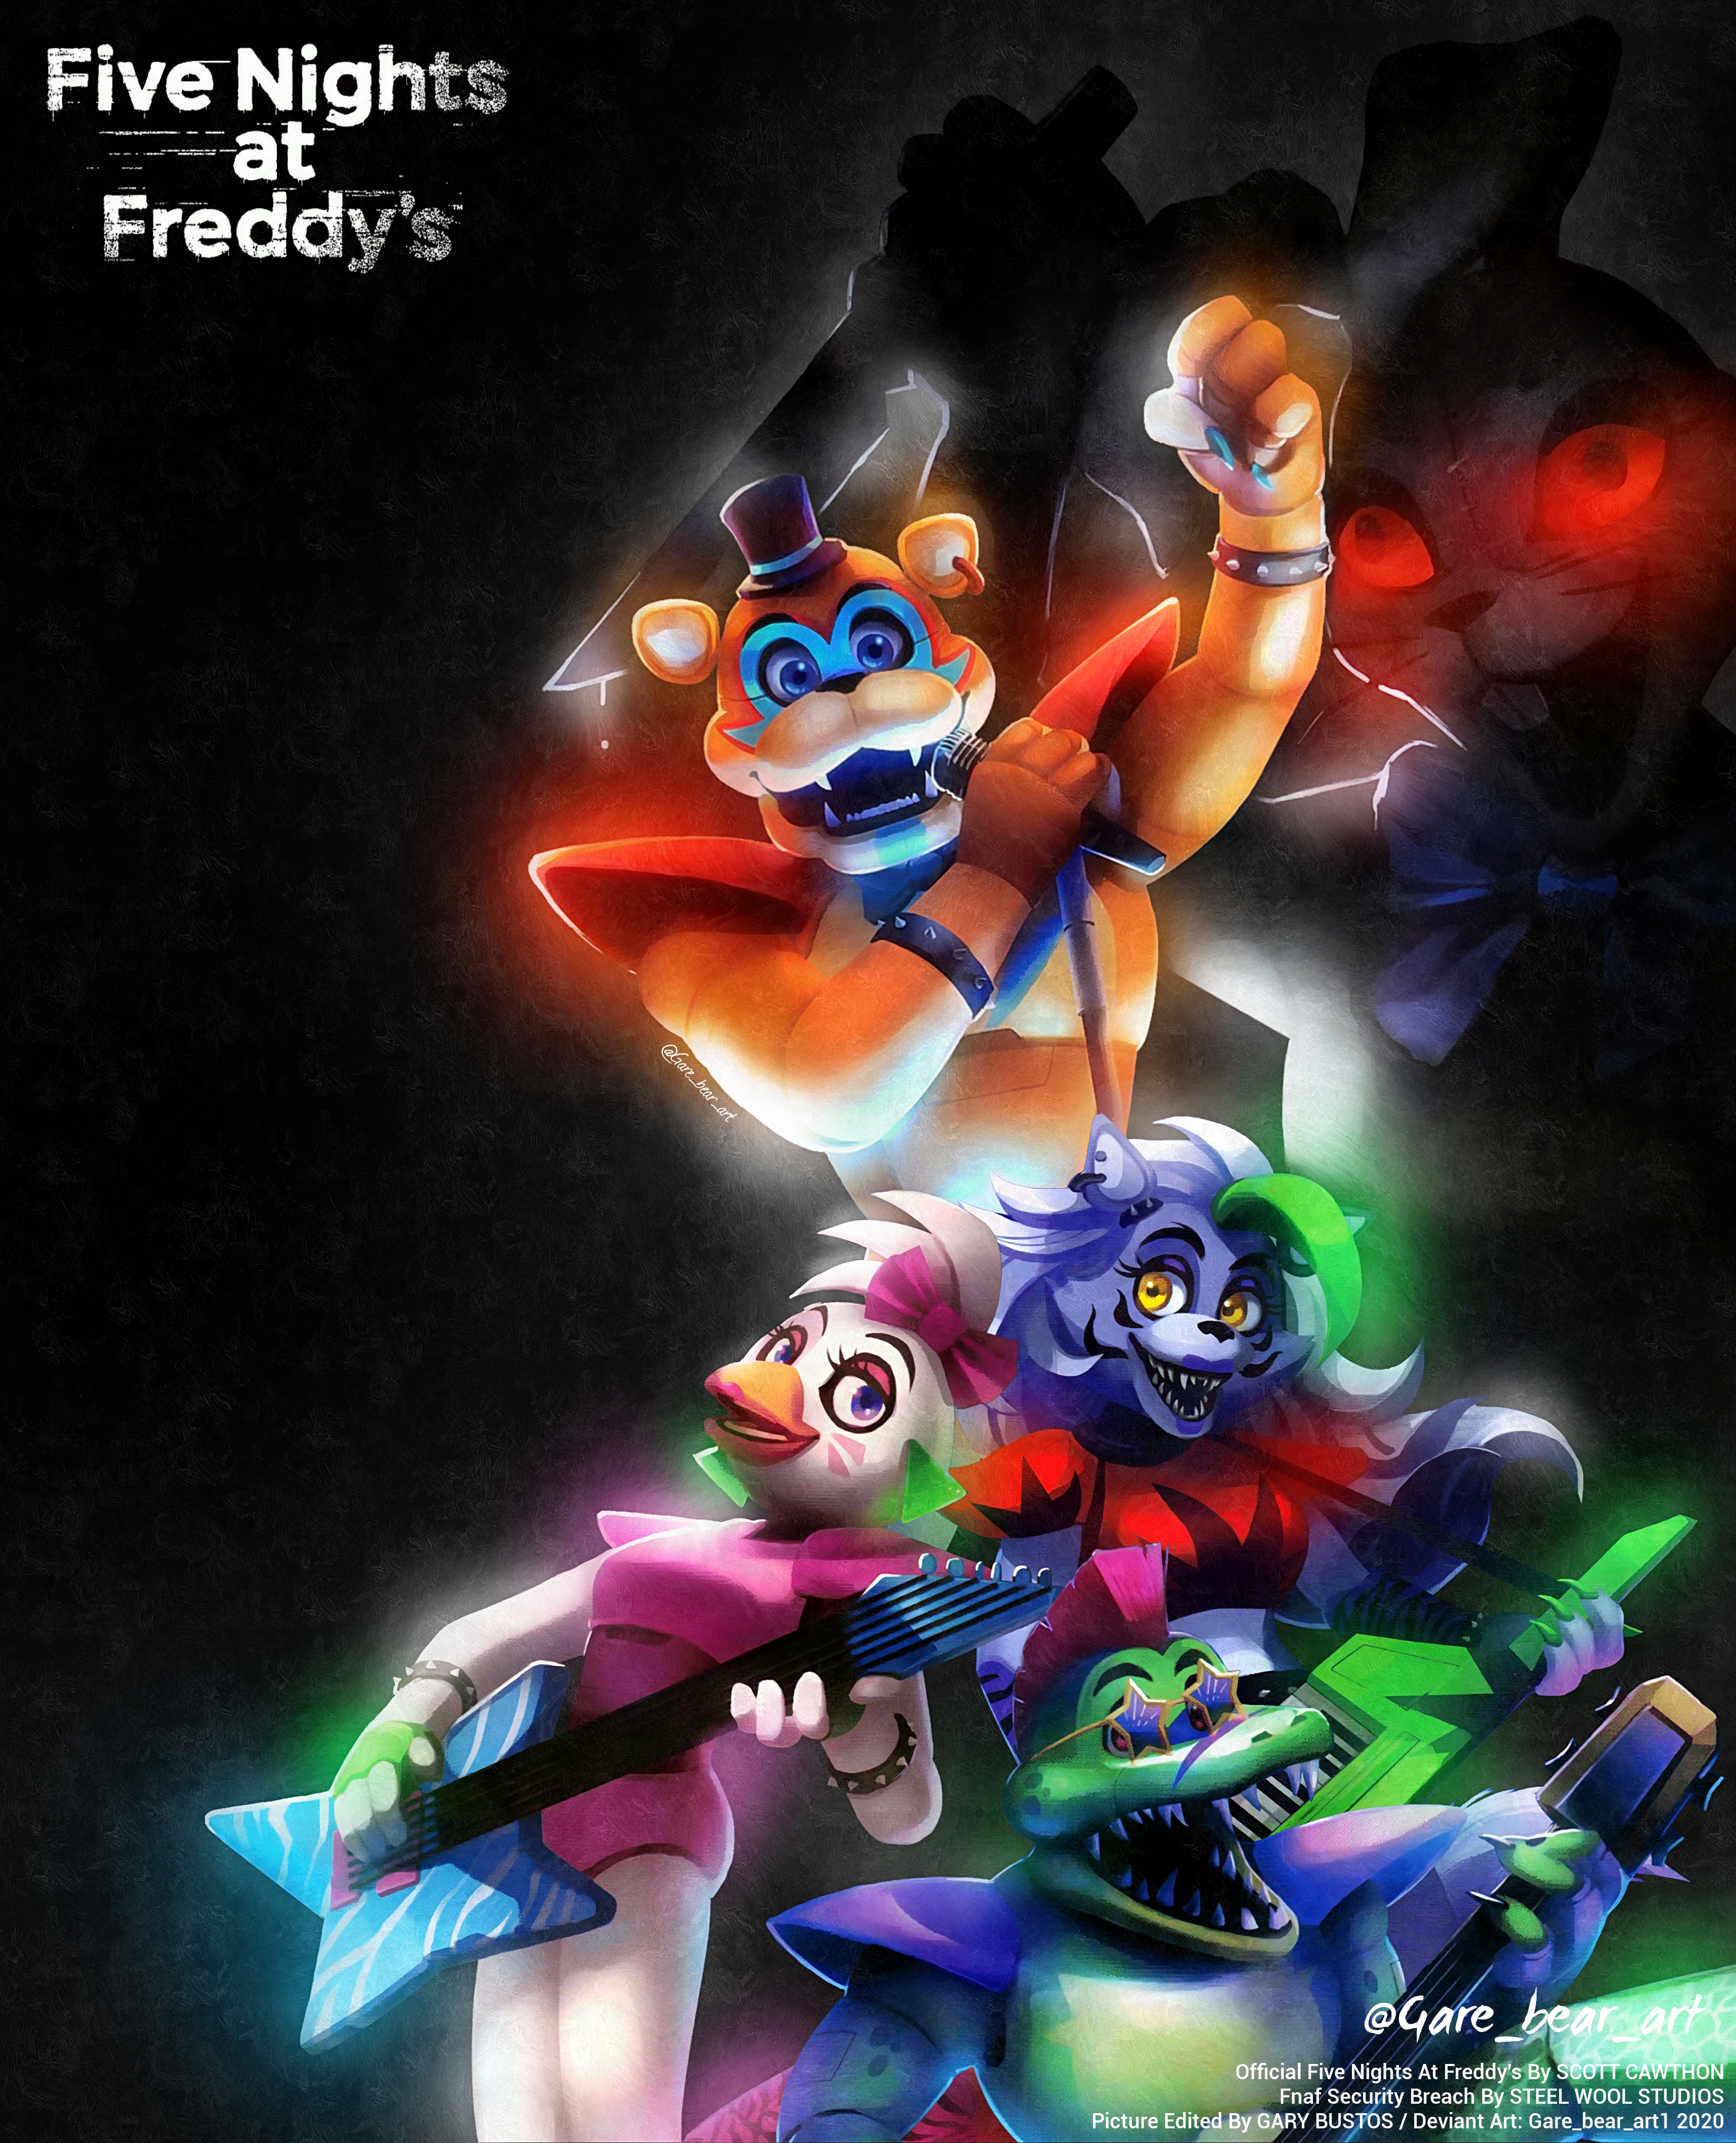 34+] Five Nights At Freddy's: Security Breach Wallpapers - WallpaperSafari